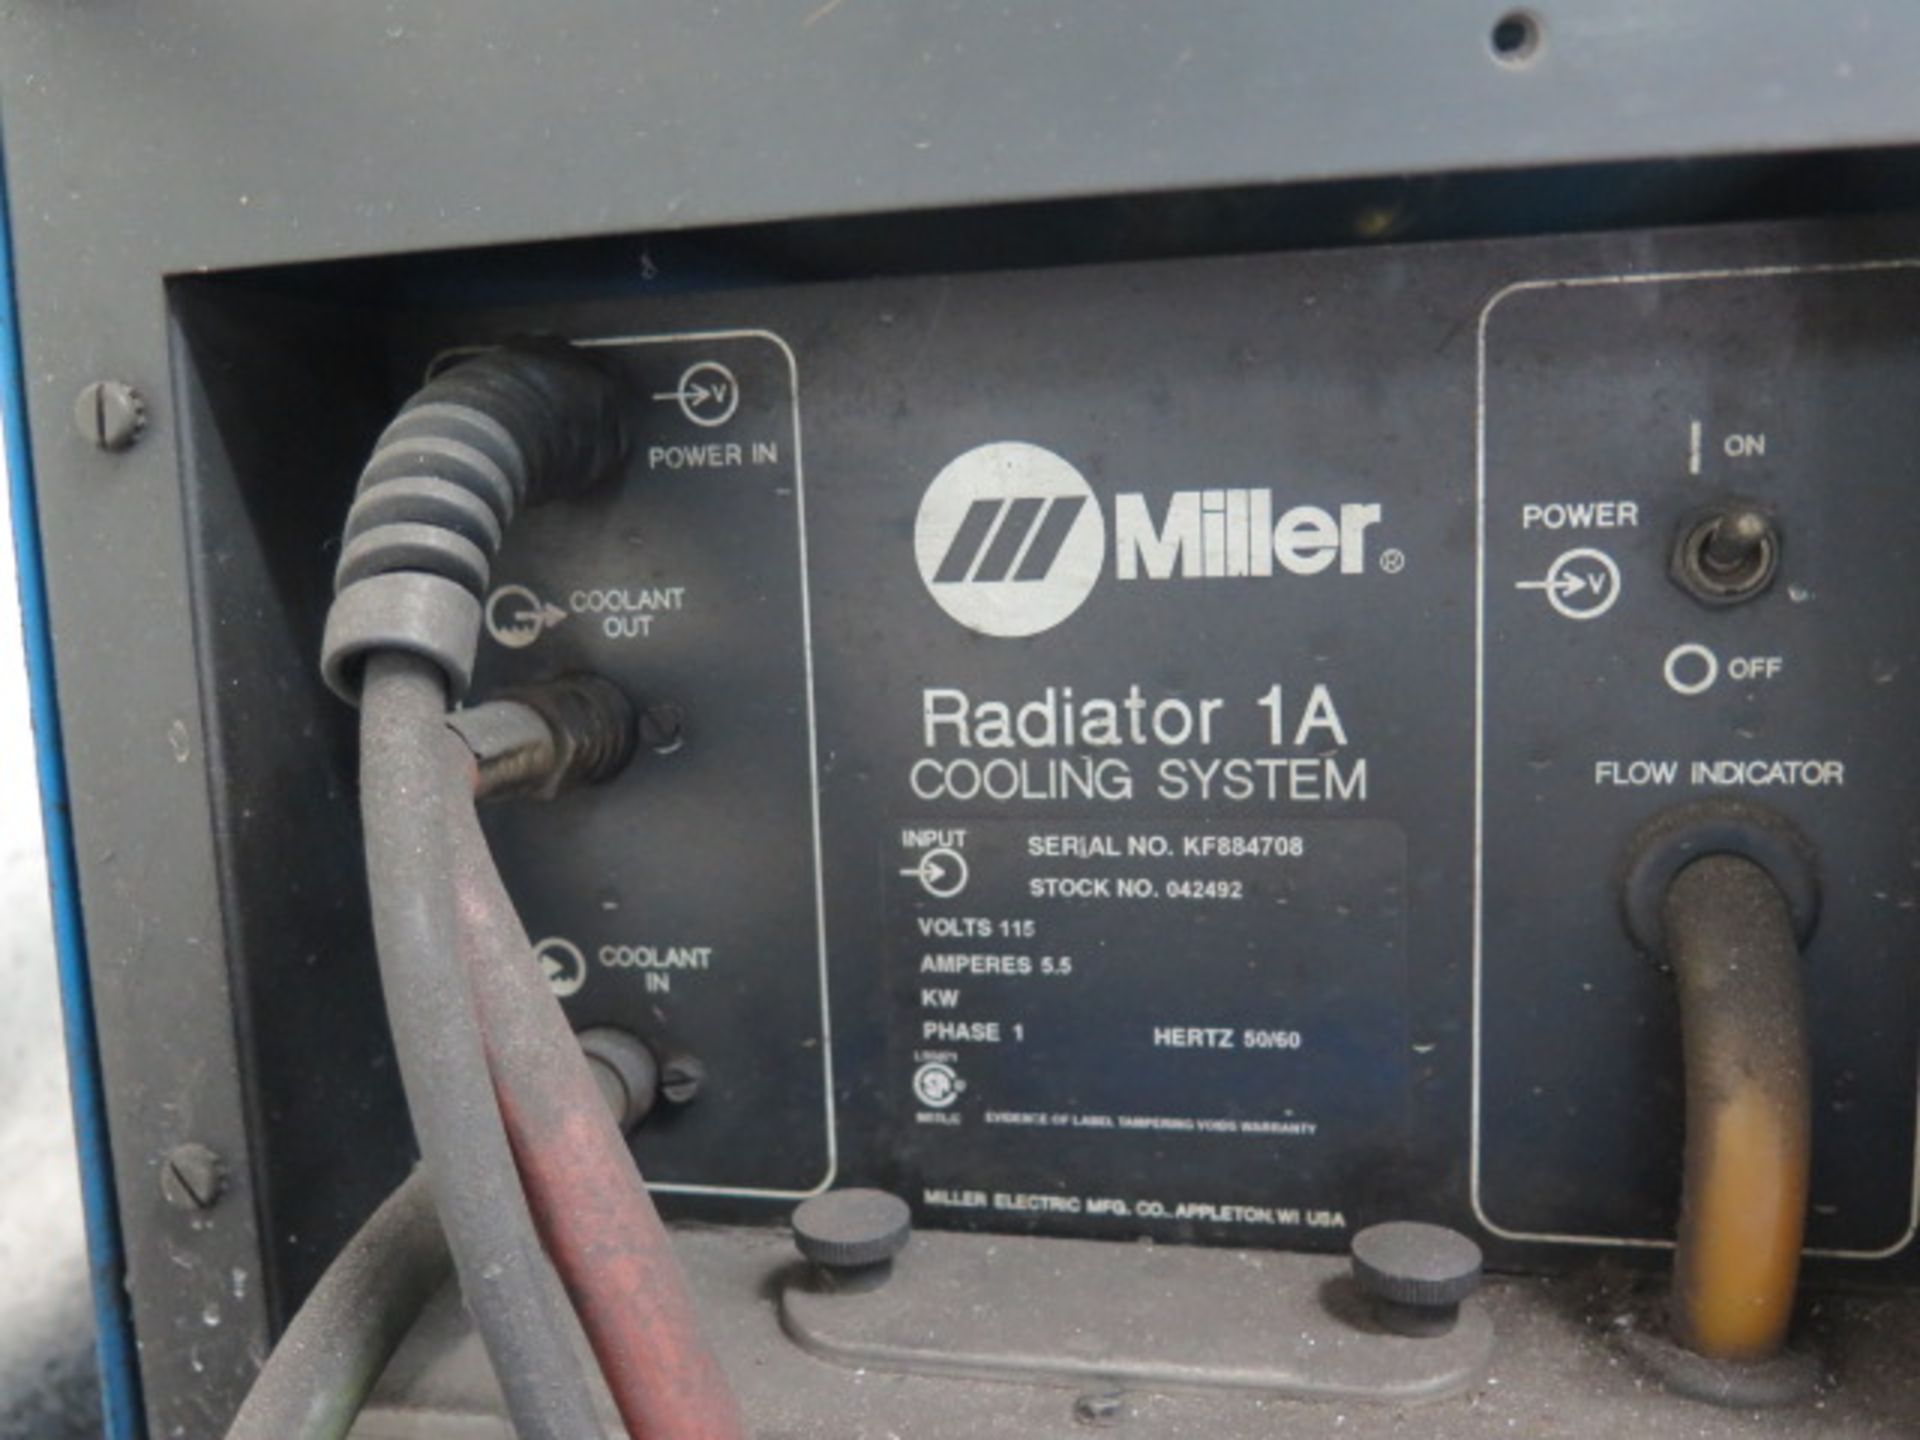 Miller Syncrowave 250 CC-AC/DC Arc Welding Power Source w/ Miller Radiator-1A Cooling, SOLD AS IS - Image 4 of 13